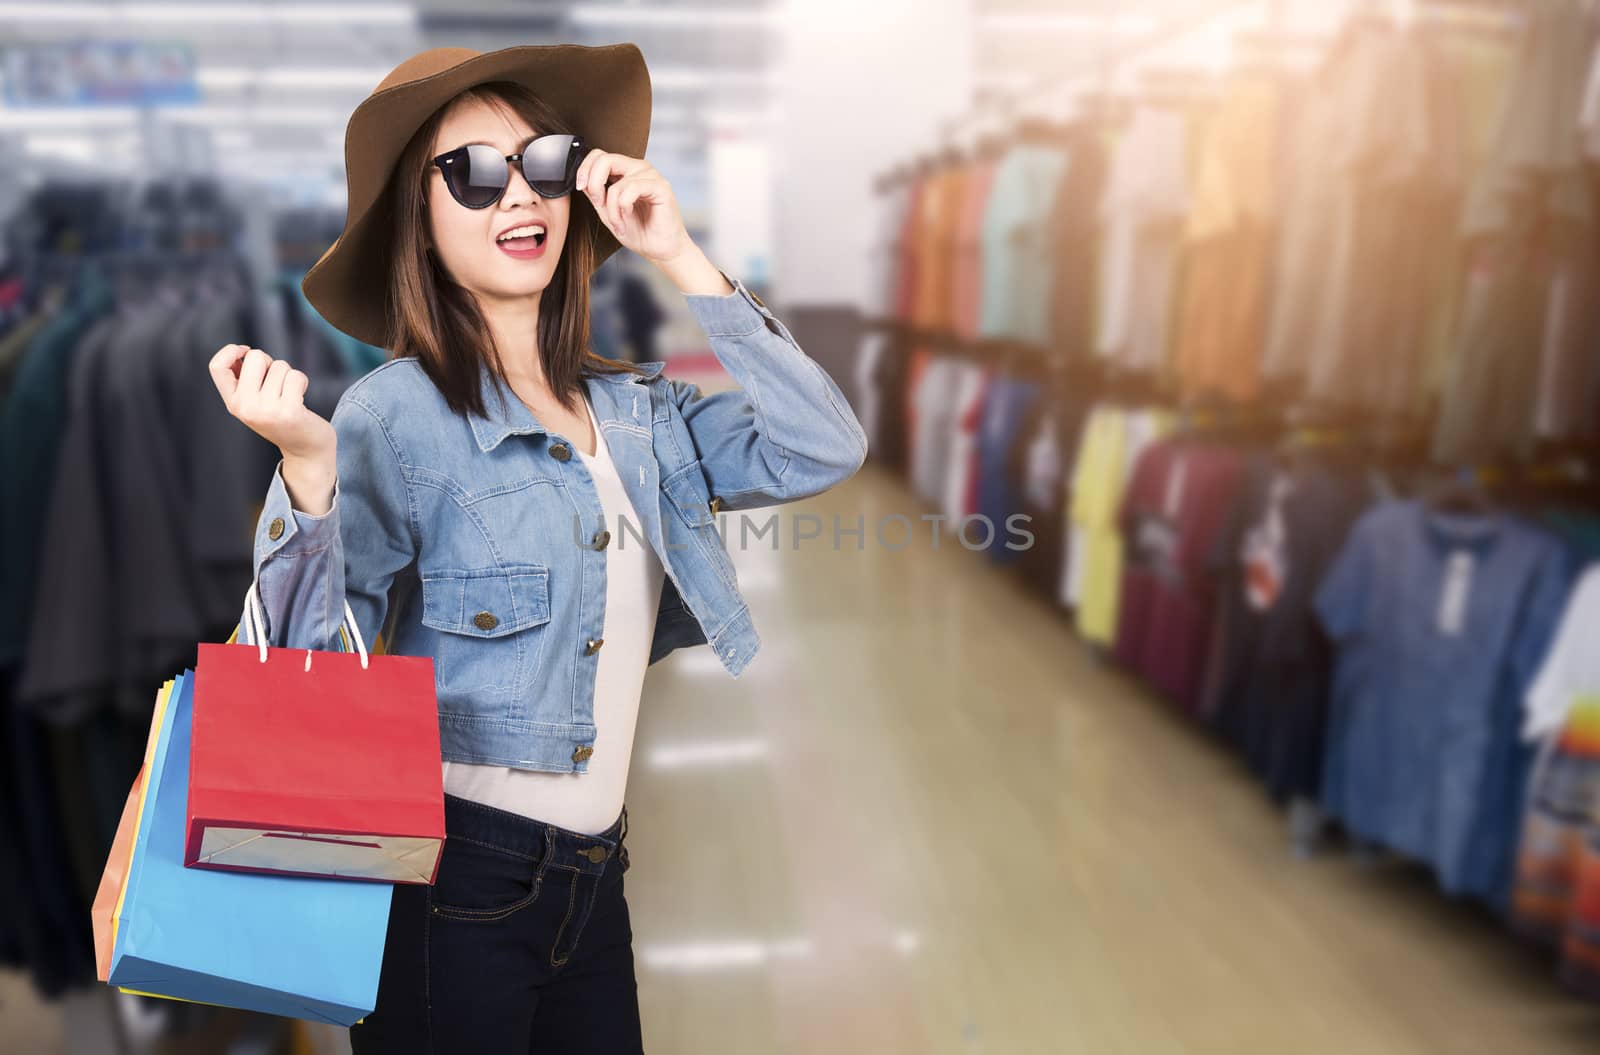 woman teen smiling standing with sunglasses and hat she excited  by Sorapop